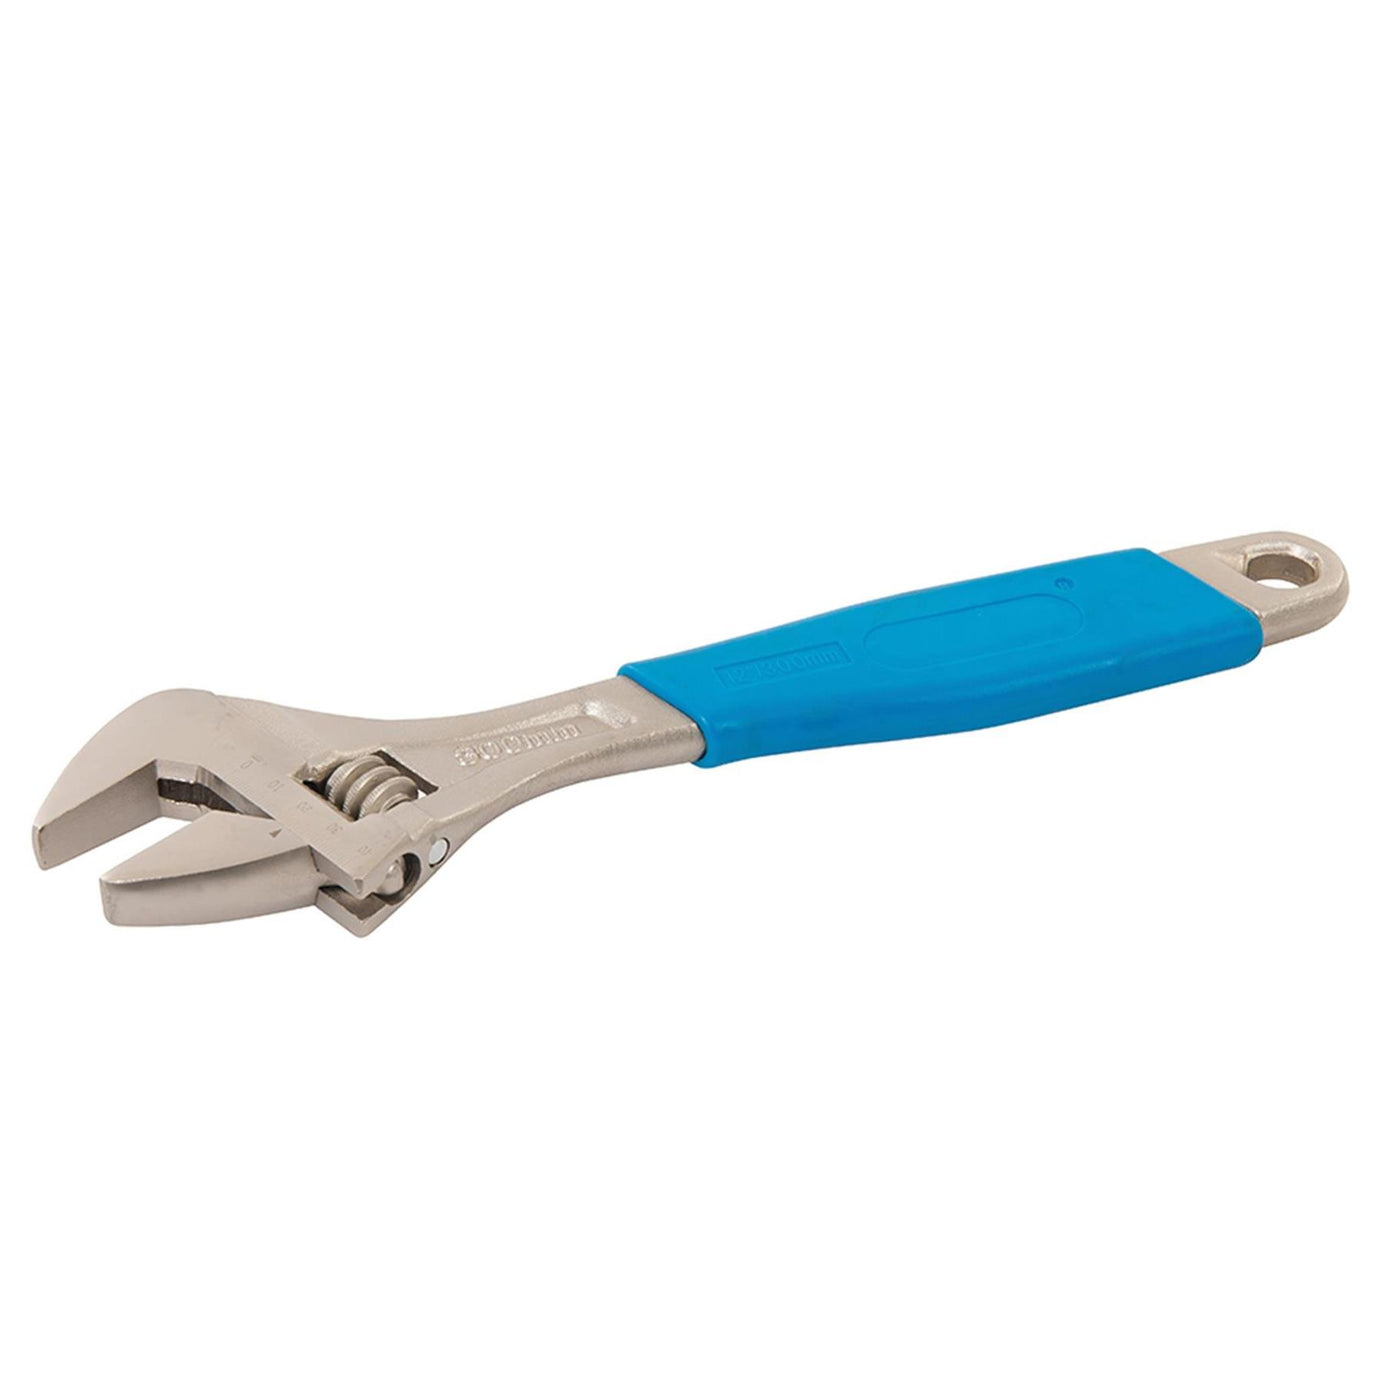 Adjustable Wrench 300mm Length - Jaw 32mm Corrosion-Resistant Satin Finish